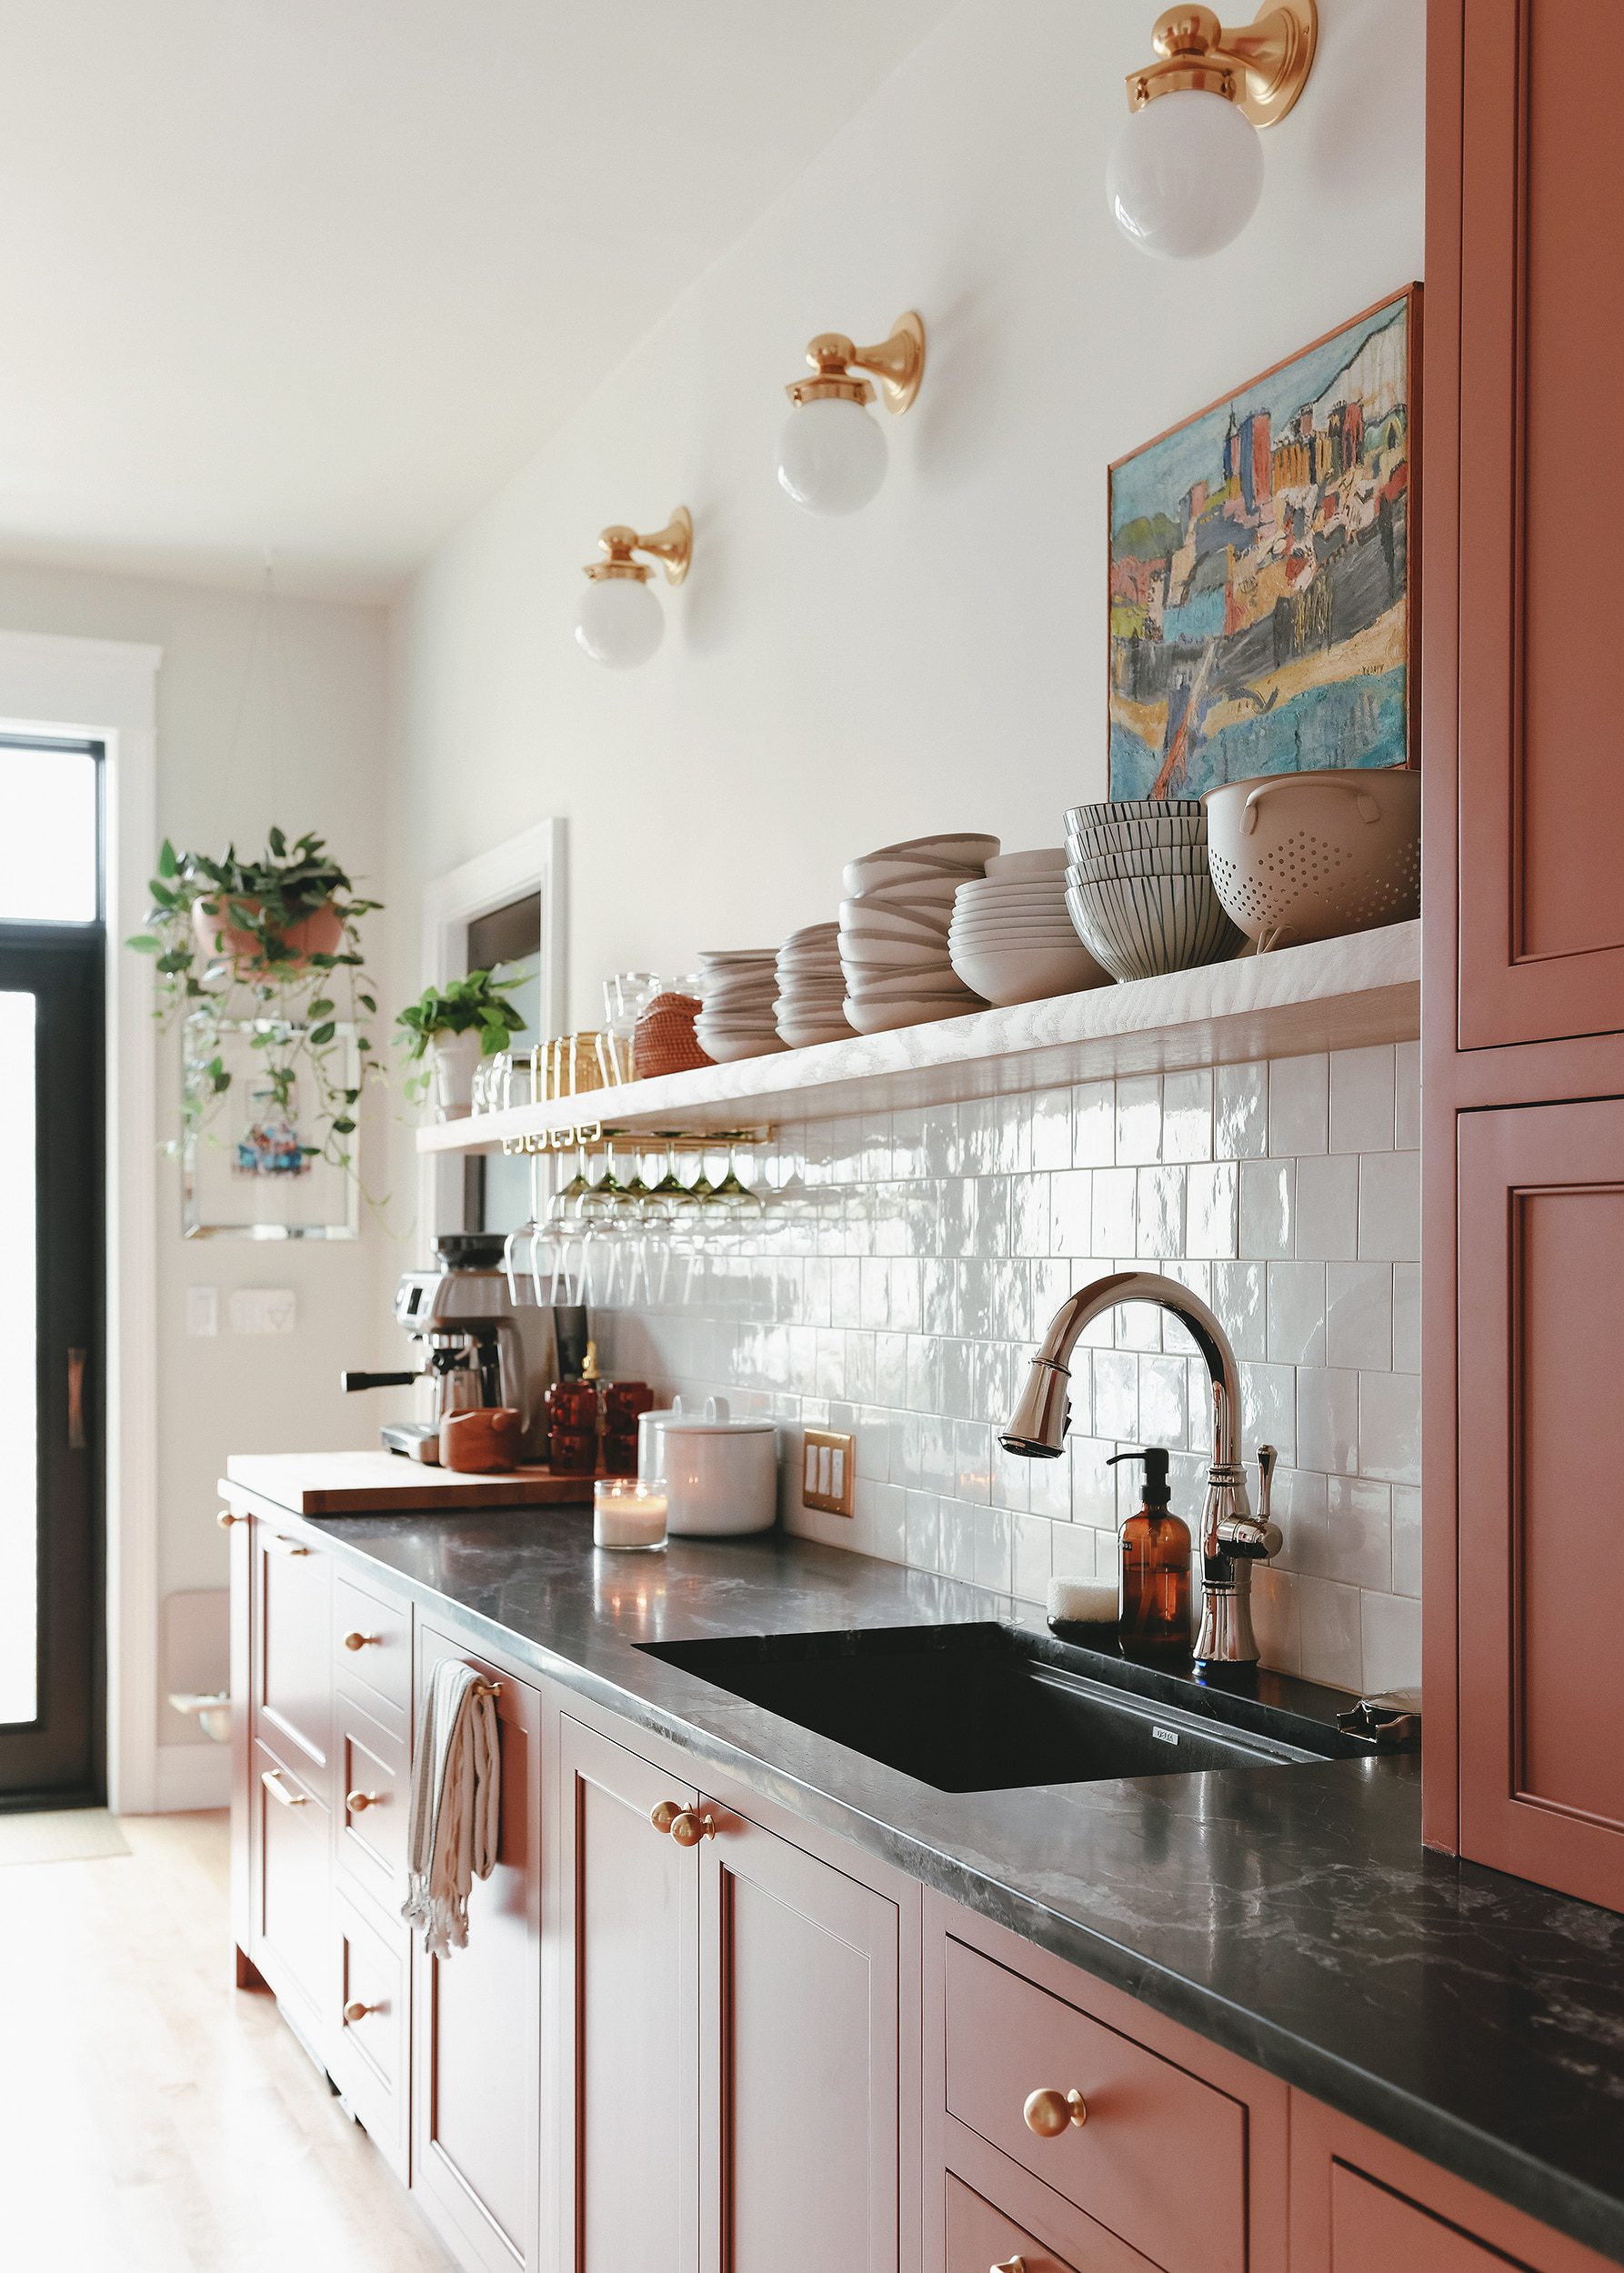 The 'wet' wall of our newly-completed kitchen // via Yellow Brick Home